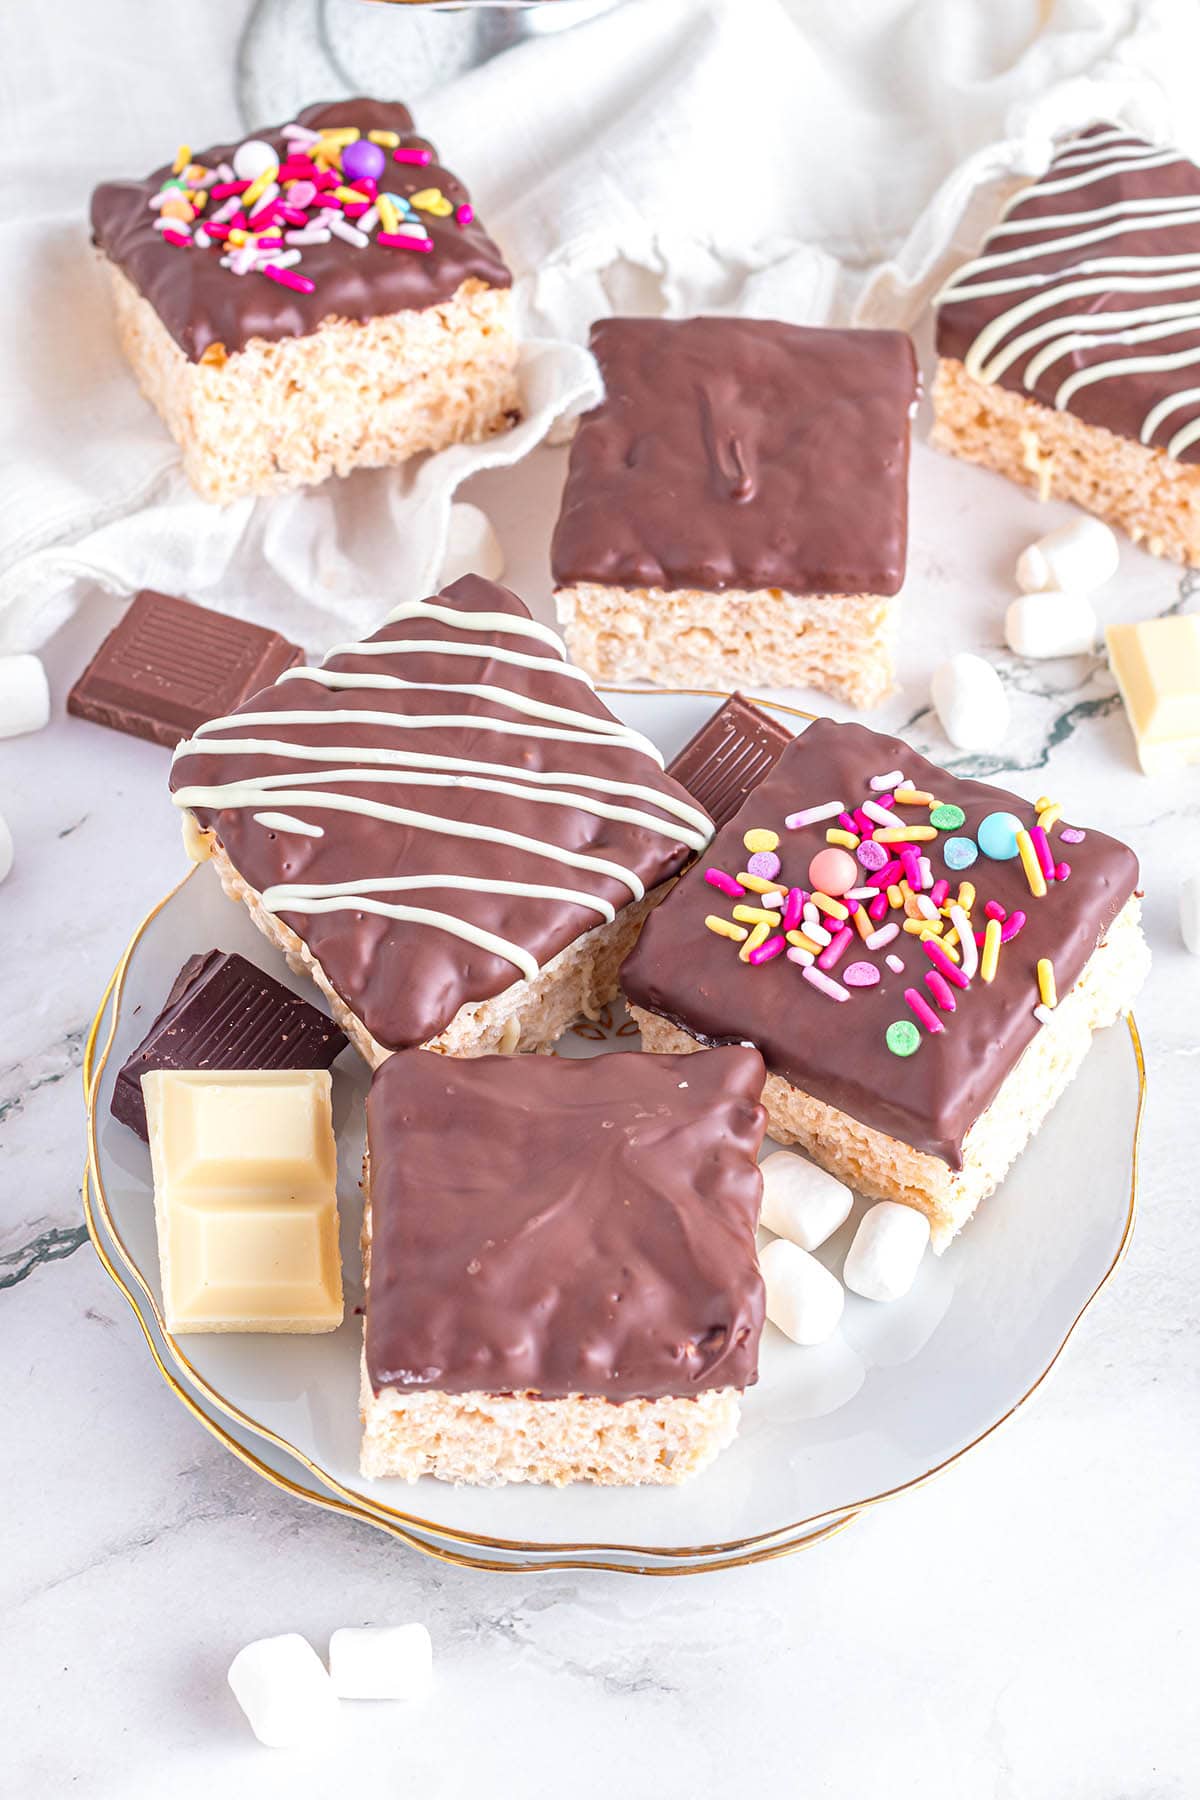 3 pieces of Chocolate Dipped Rice Krispie Treats on a plate.